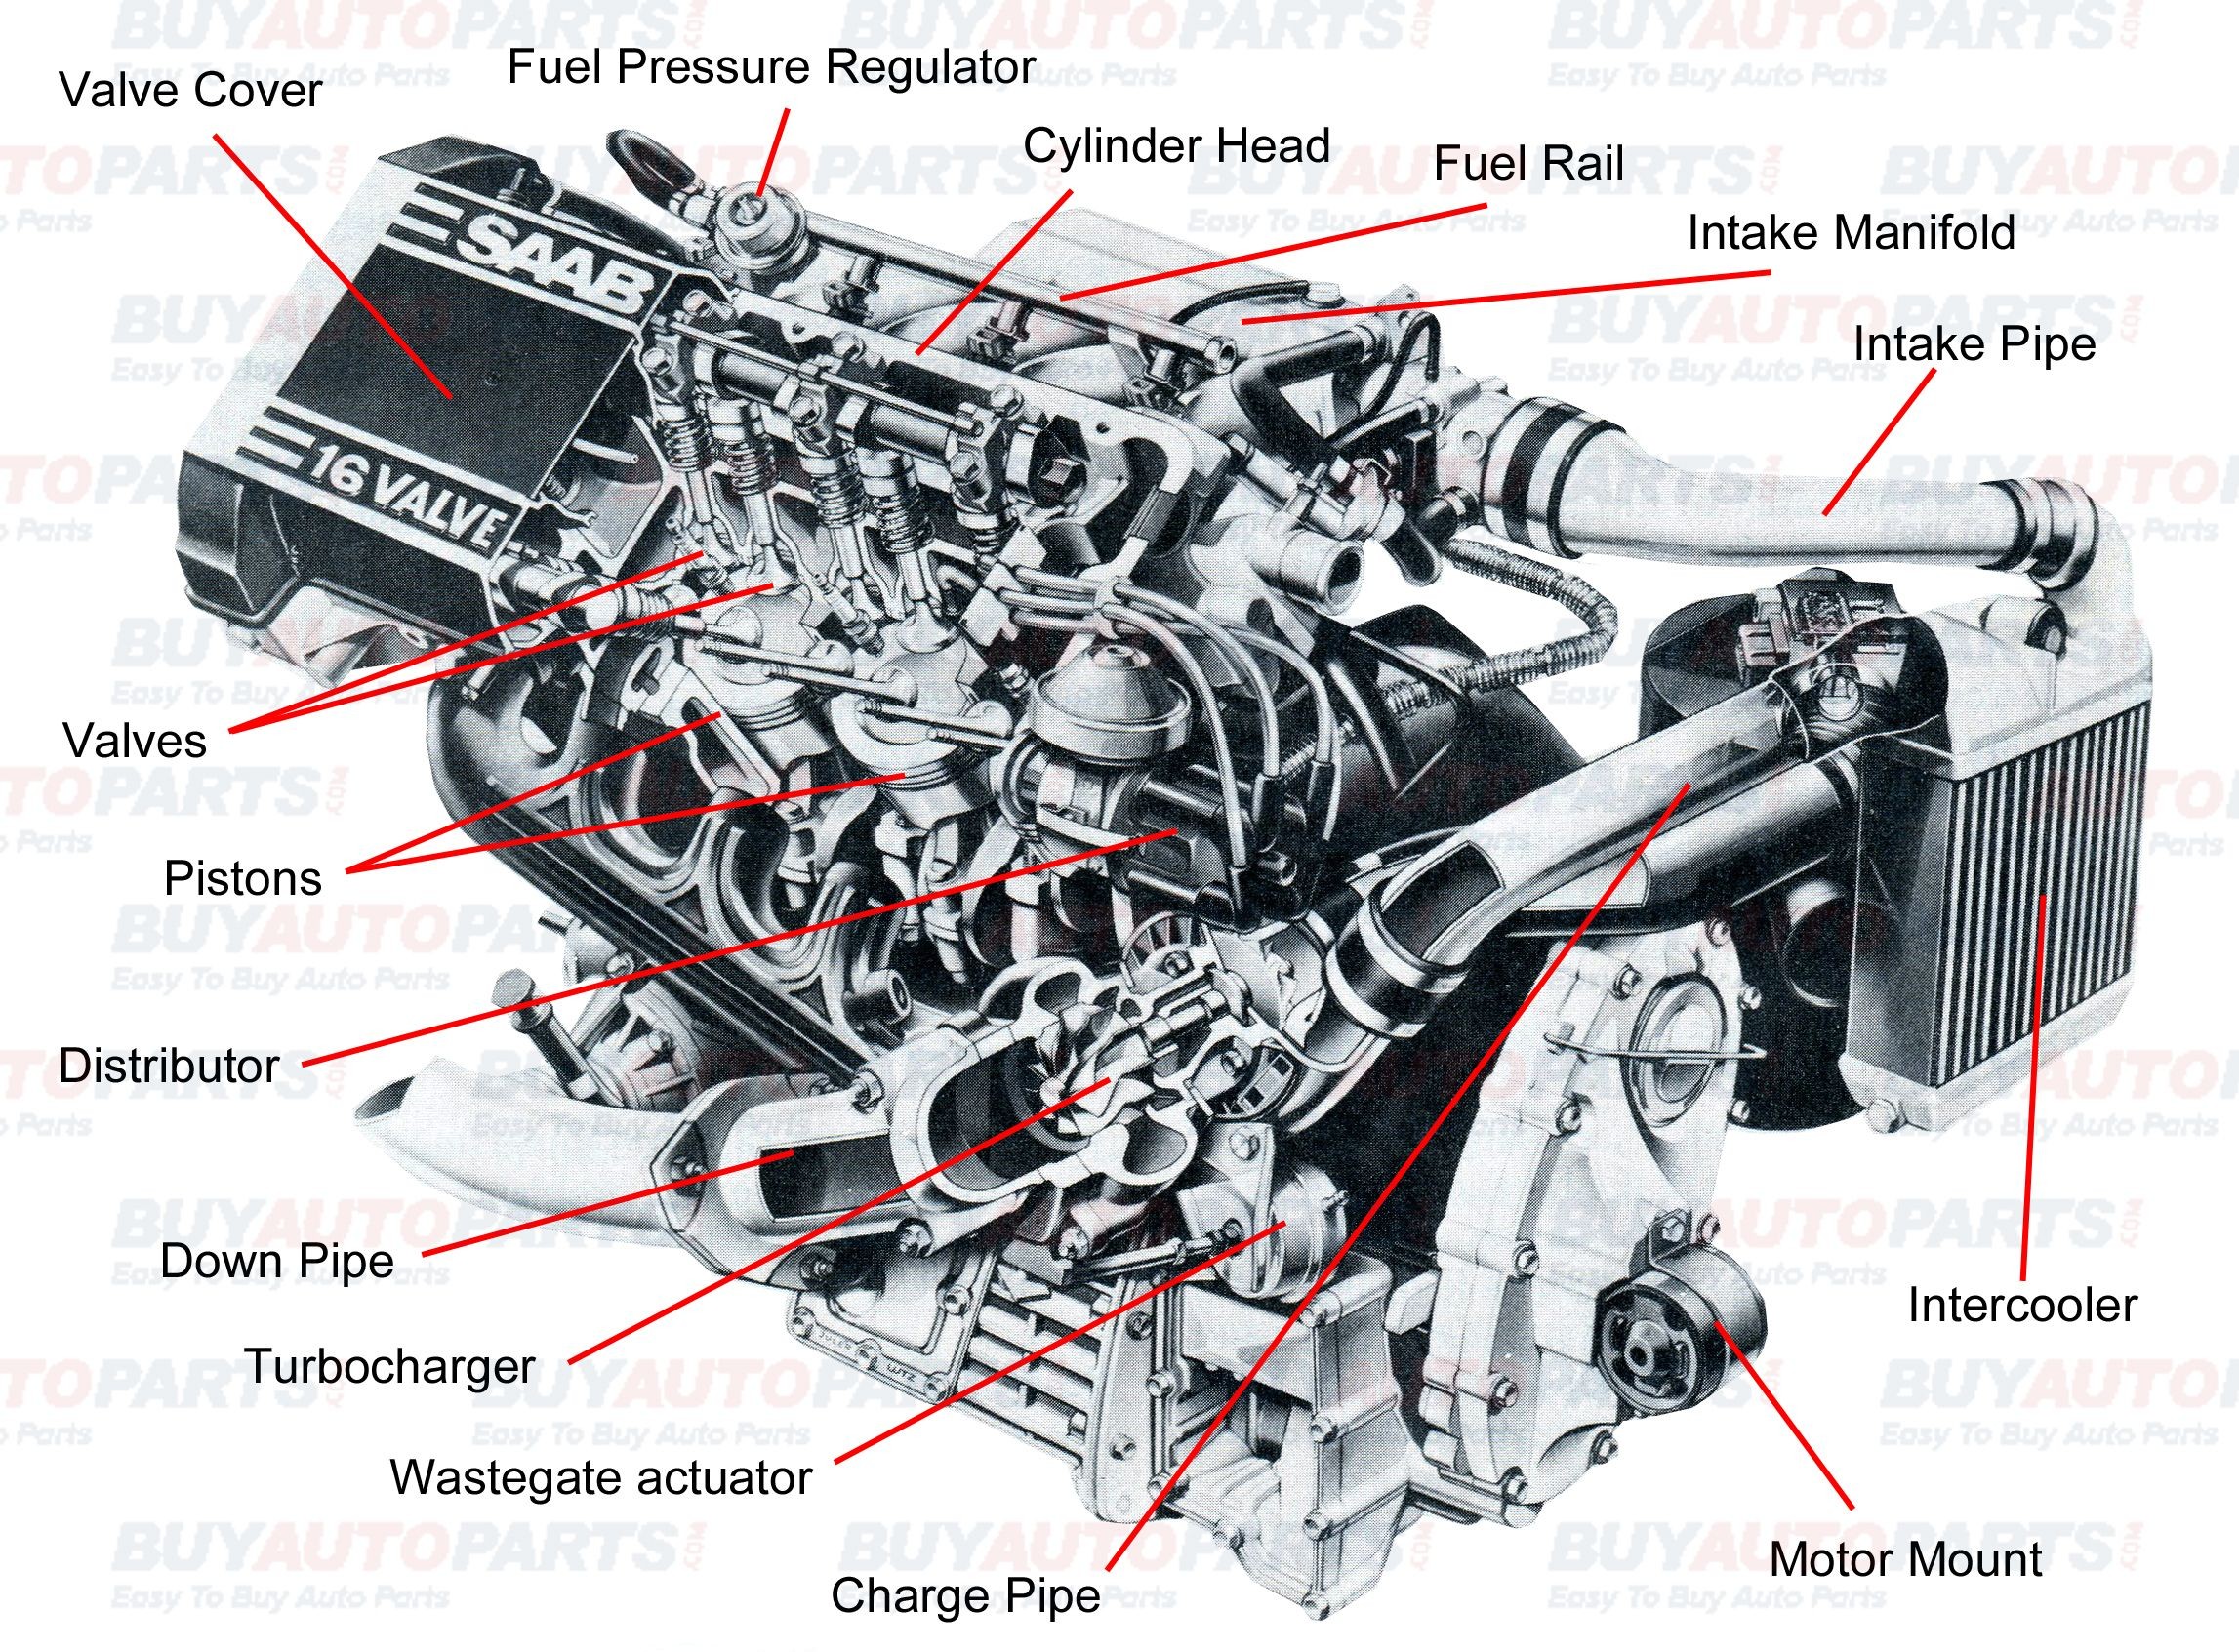 Motor Engine Diagram Pin by Jimmiejanet Testellamwfz On What Does An Engine with Turbo Of Motor Engine Diagram